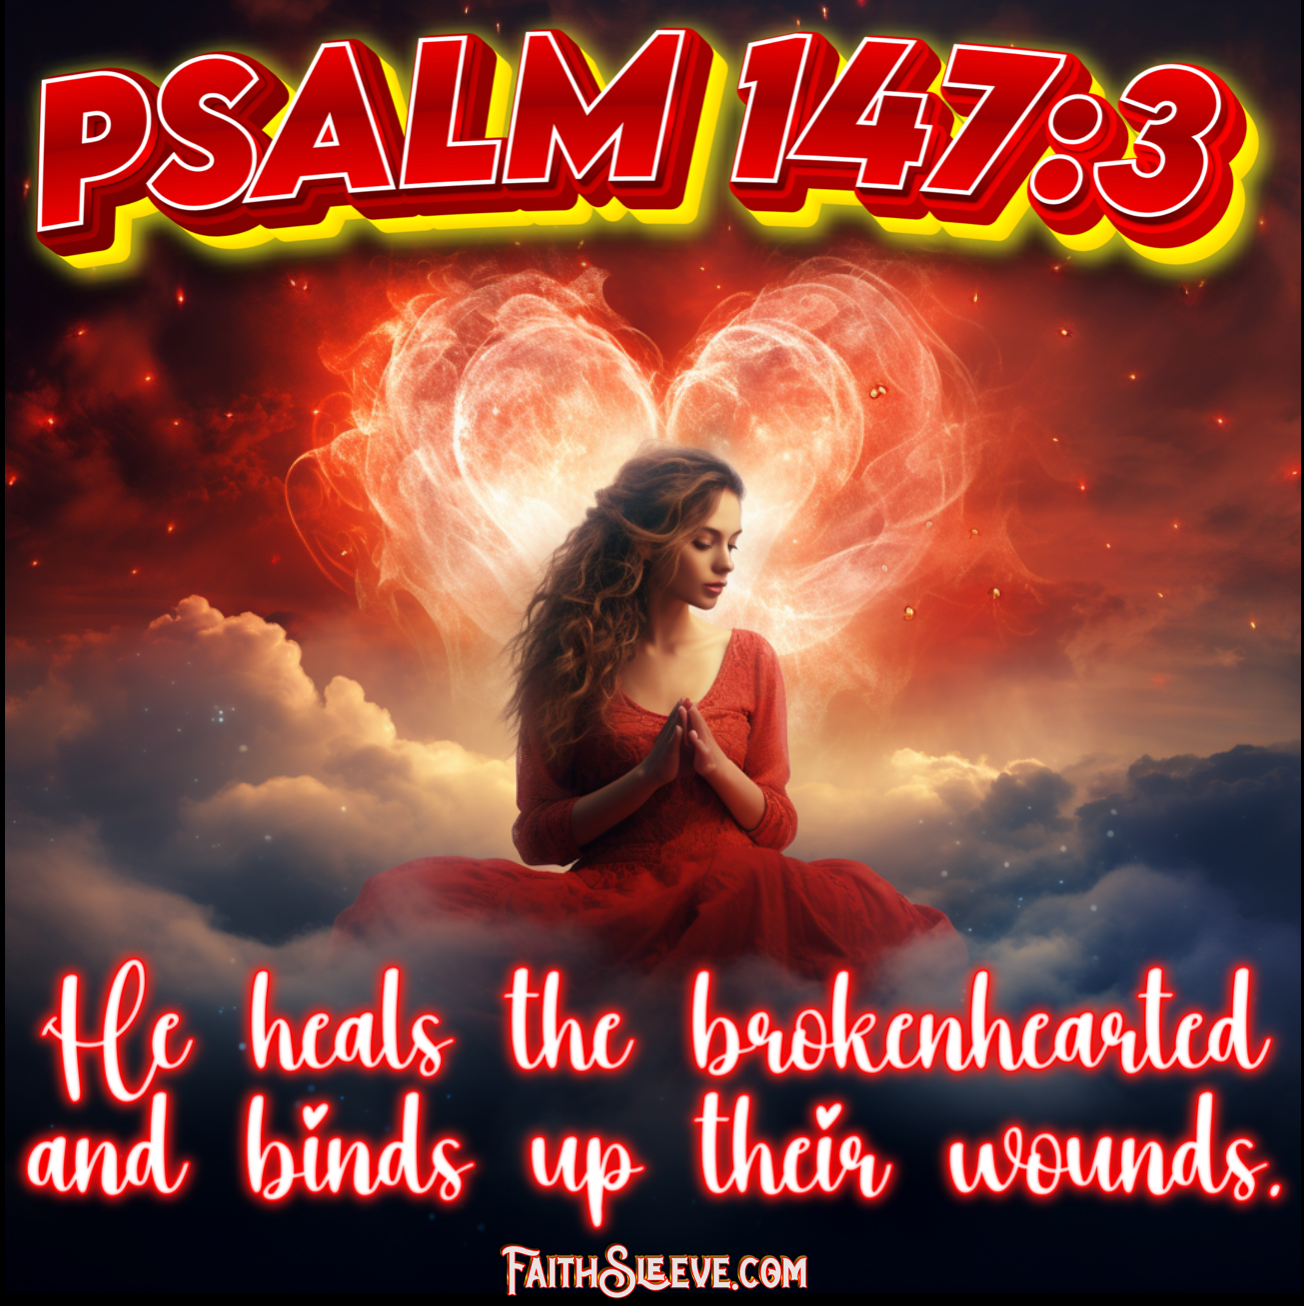 Psalm 1:47 Bible Verse - He Heals the Brokenhearted and Binds up their Wounds